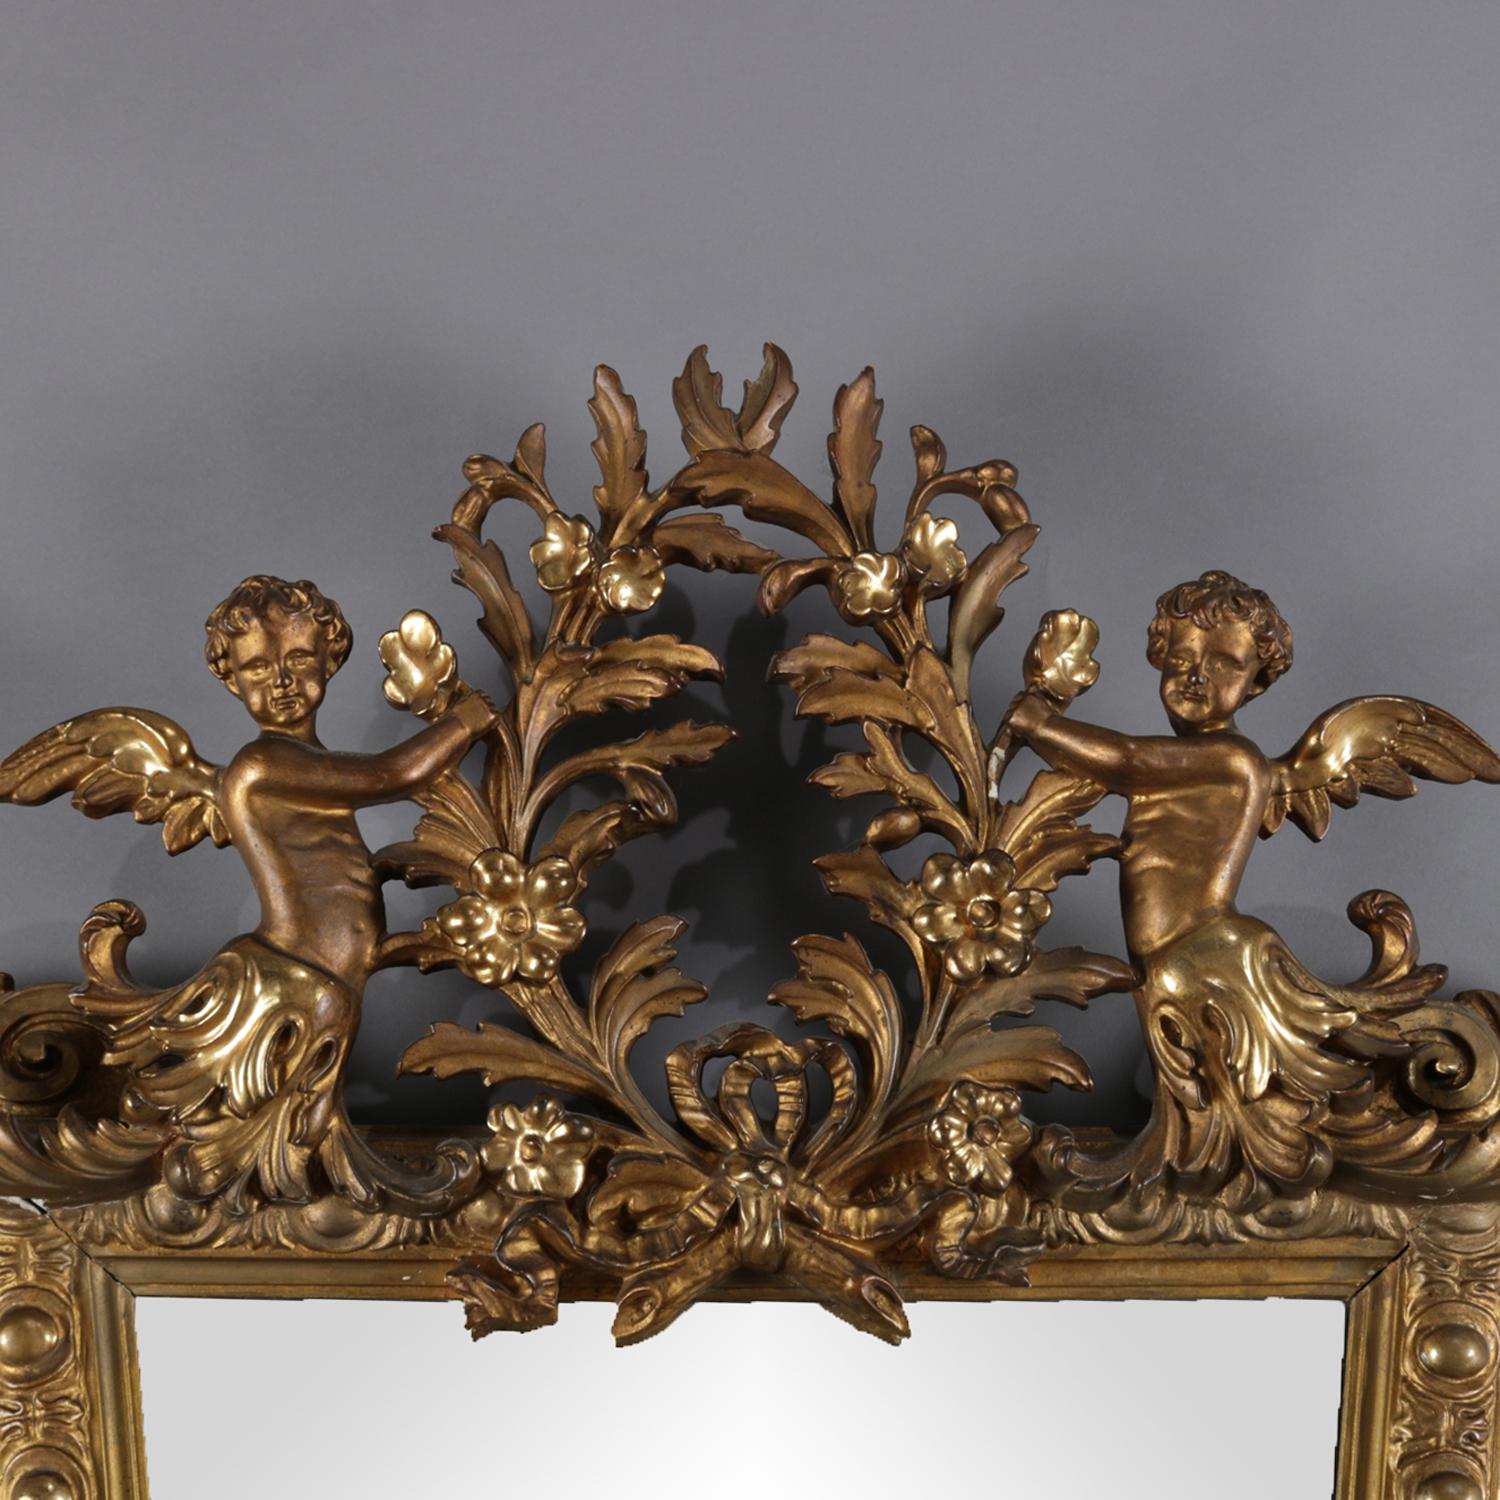 Antique Italian Classical and figural wall mirror features pierced crest with central foliate form wreath and flanking cherubs, tapered form frame with foliate decoration terminates in pierced fleur de lis apron, 19th century

Measures: 45